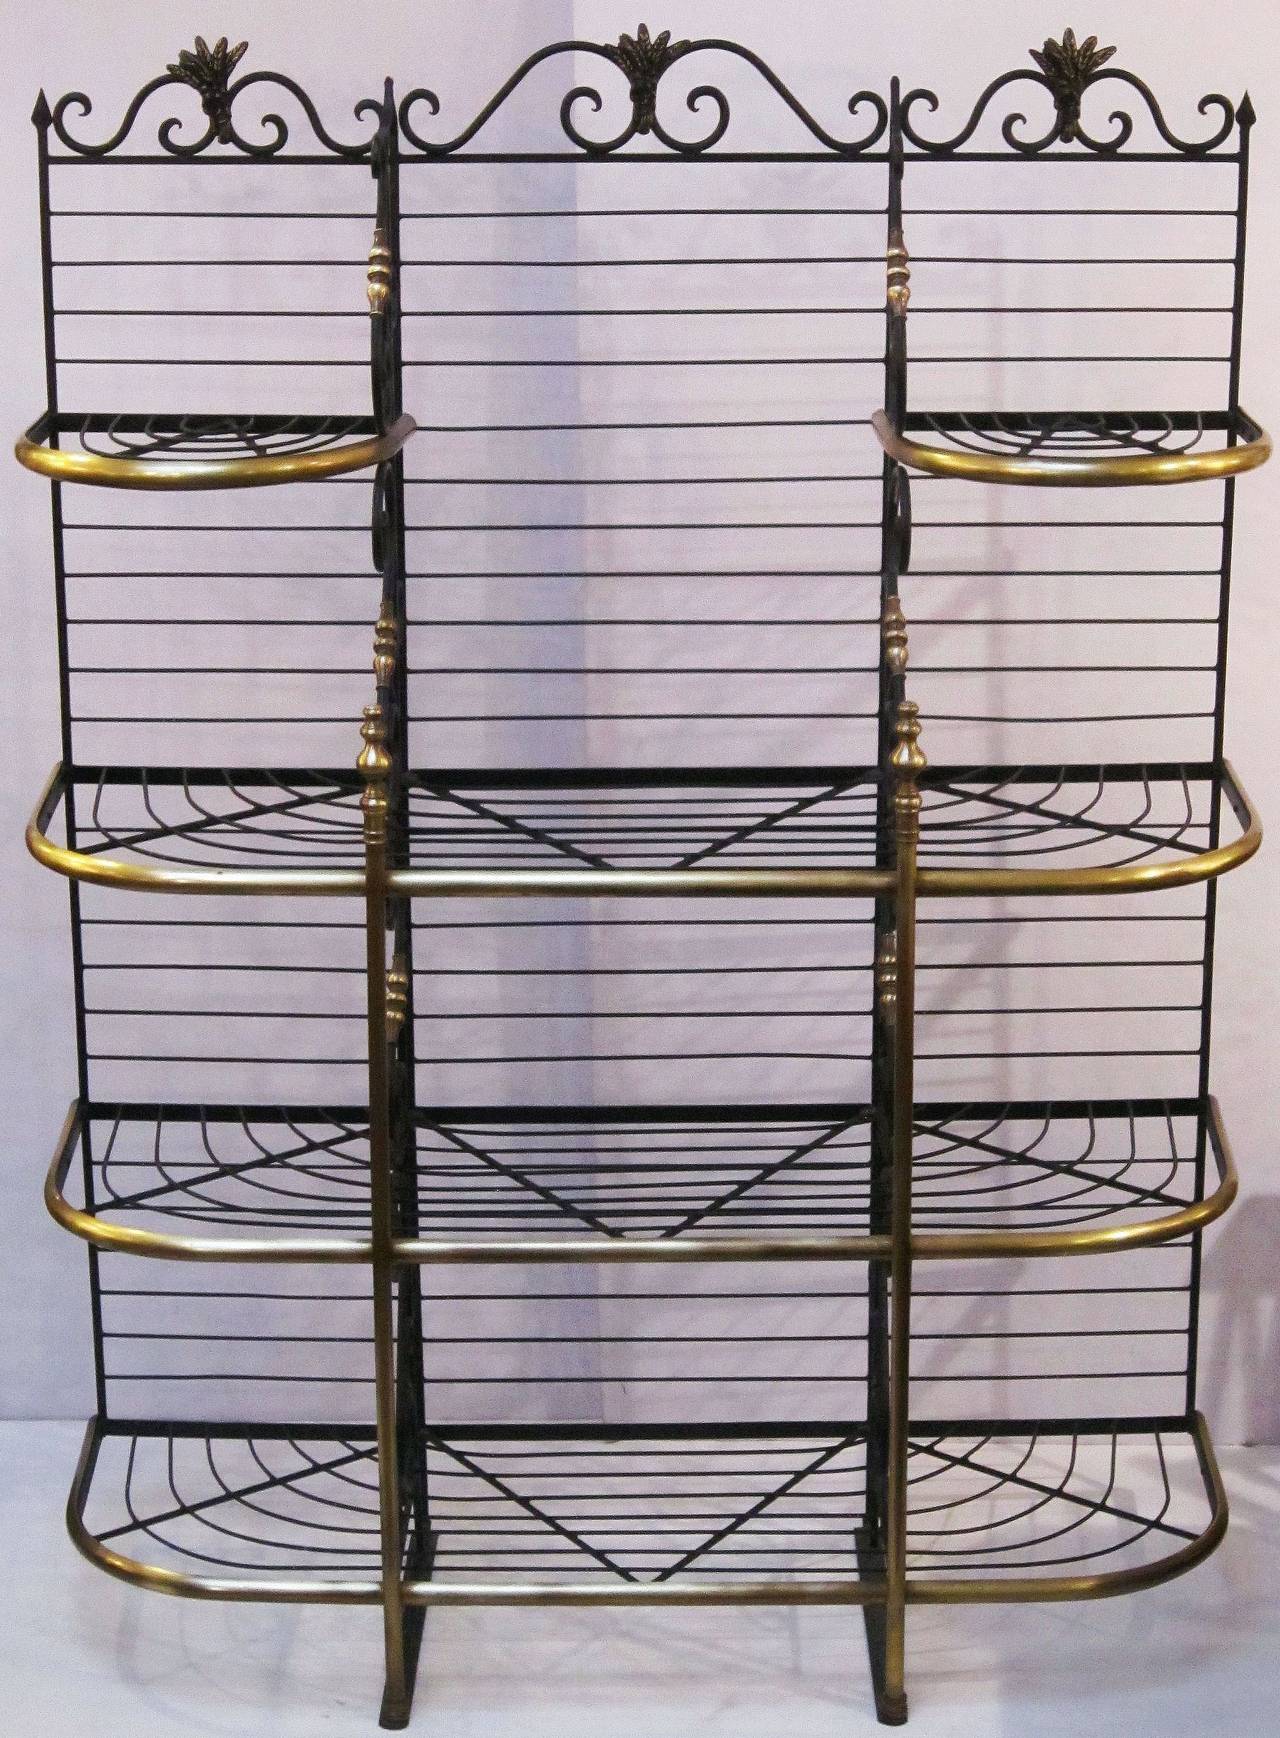 A large French baker's rack of wrought iron with decorative brass trim and finials, featuring scrolled dividing panels and four levels of shelves. 
The top frieze with ornamental sheaves of wheat and scroll-work back.